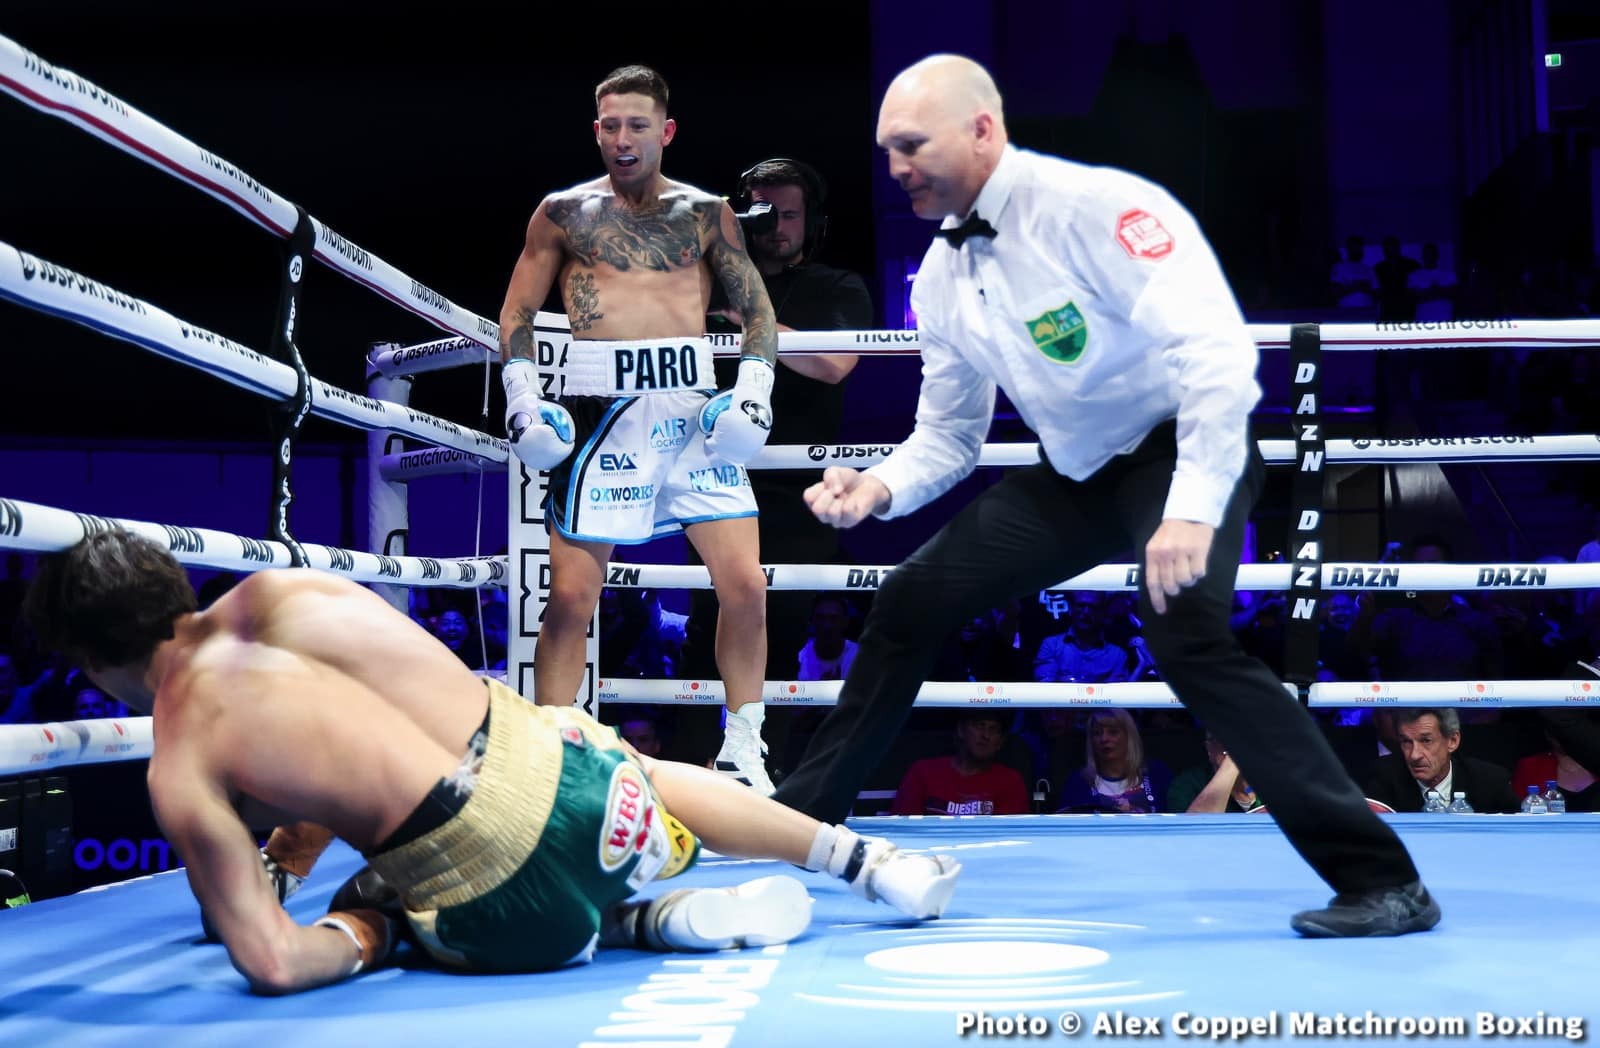 Liam Paro Scores Highlight Reel KO Over Brock Jarvis - Boxing Results